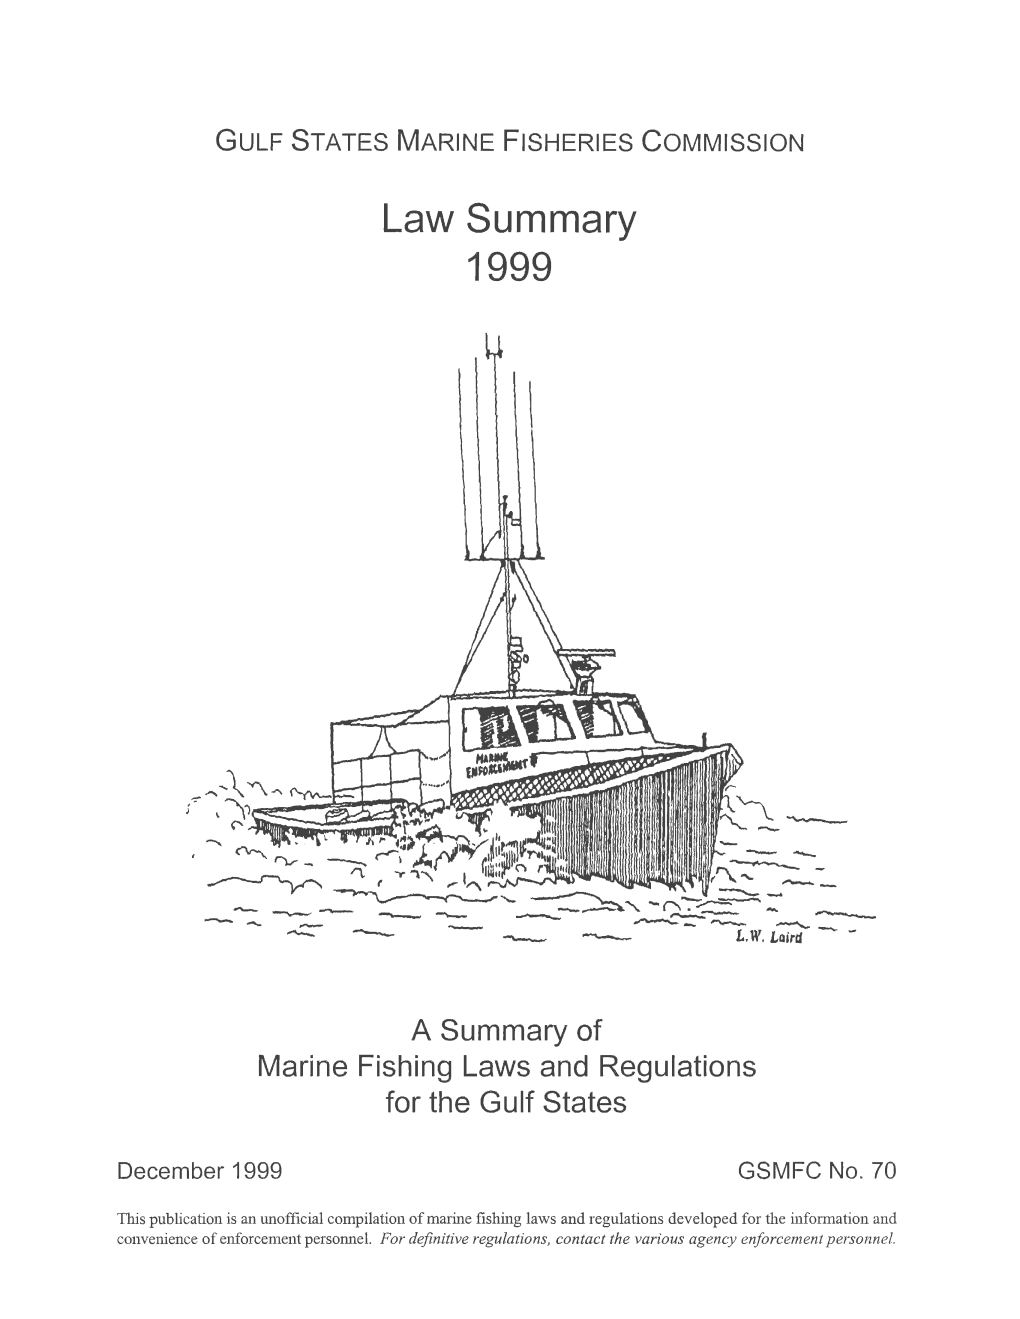 A Summary of Marine Fishing Laws and Regulations for the Gulf States